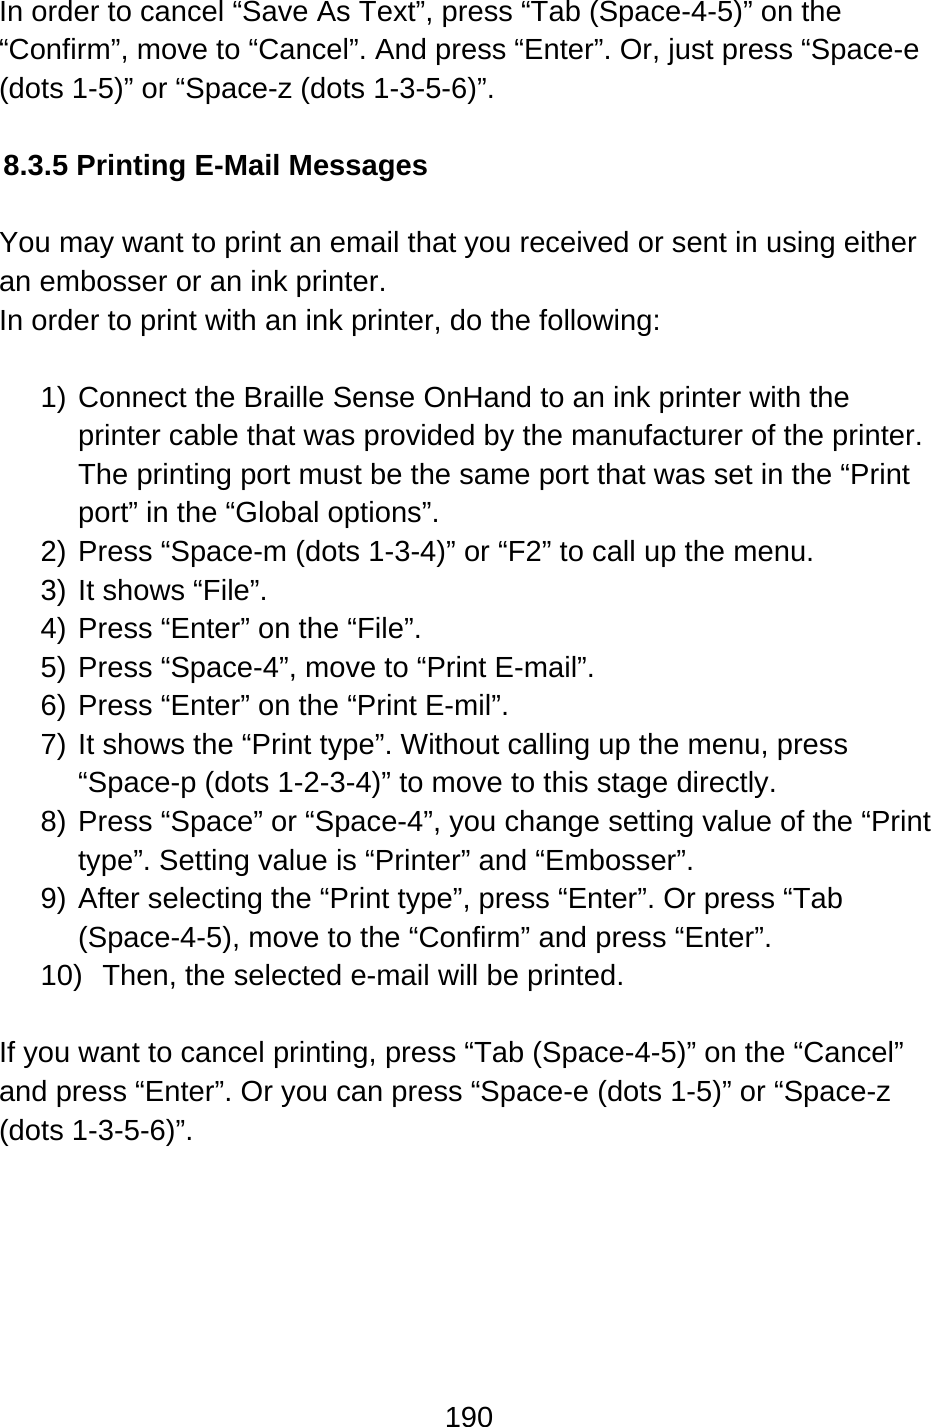 190  In order to cancel “Save As Text”, press “Tab (Space-4-5)” on the “Confirm”, move to “Cancel”. And press “Enter”. Or, just press “Space-e (dots 1-5)” or “Space-z (dots 1-3-5-6)”.  8.3.5 Printing E-Mail Messages  You may want to print an email that you received or sent in using either an embosser or an ink printer. In order to print with an ink printer, do the following:  1) Connect the Braille Sense OnHand to an ink printer with the printer cable that was provided by the manufacturer of the printer. The printing port must be the same port that was set in the “Print port” in the “Global options”. 2) Press “Space-m (dots 1-3-4)” or “F2” to call up the menu.   3) It shows “File”. 4) Press “Enter” on the “File”. 5) Press “Space-4”, move to “Print E-mail”. 6) Press “Enter” on the “Print E-mil”.   7) It shows the “Print type”. Without calling up the menu, press “Space-p (dots 1-2-3-4)” to move to this stage directly. 8) Press “Space” or “Space-4”, you change setting value of the “Print type”. Setting value is “Printer” and “Embosser”. 9) After selecting the “Print type”, press “Enter”. Or press “Tab (Space-4-5), move to the “Confirm” and press “Enter”. 10)  Then, the selected e-mail will be printed.  If you want to cancel printing, press “Tab (Space-4-5)” on the “Cancel” and press “Enter”. Or you can press “Space-e (dots 1-5)” or “Space-z (dots 1-3-5-6)”.      